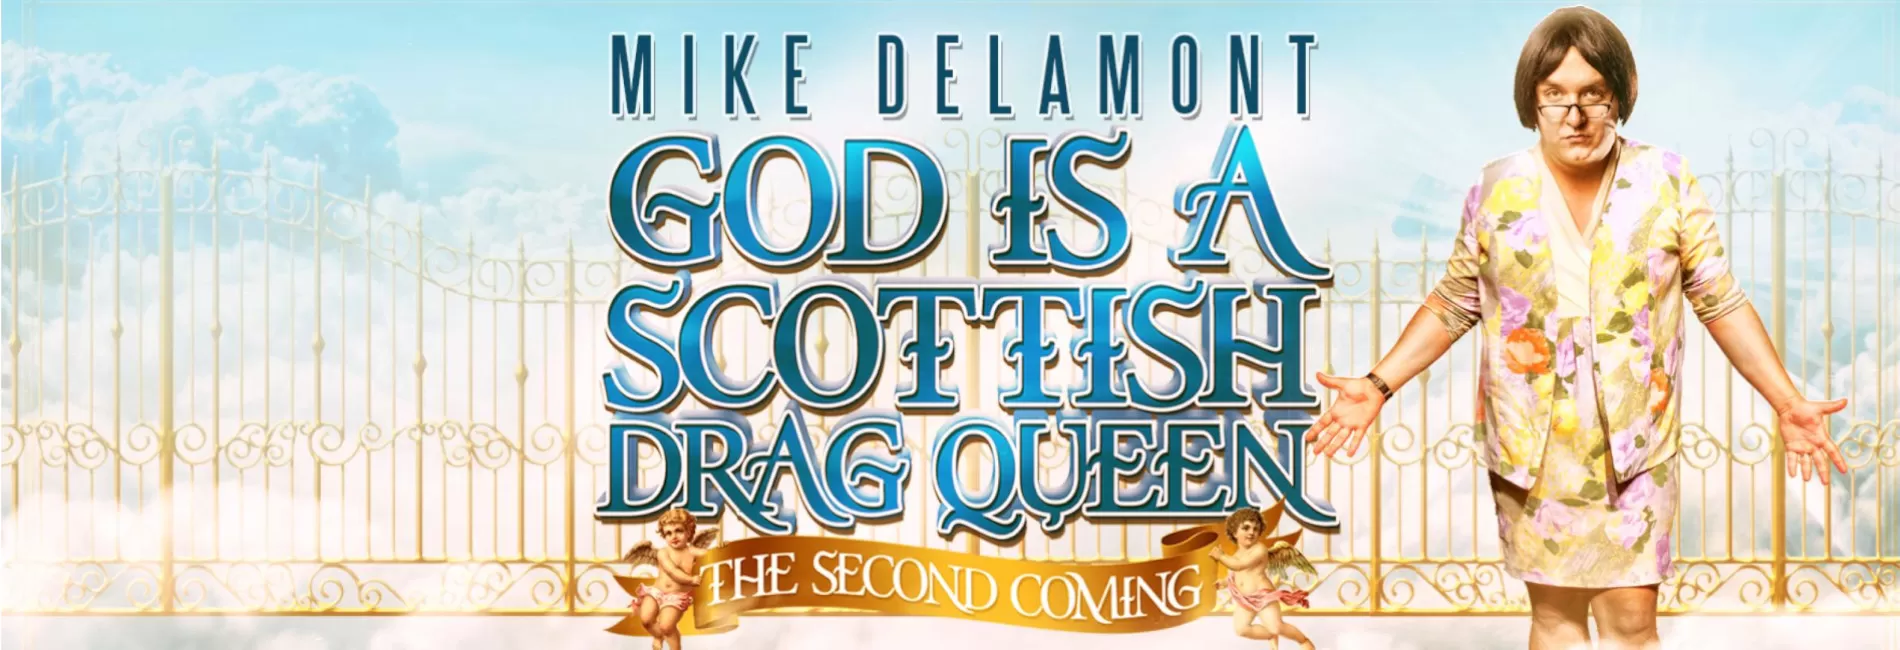 God is a Scottish Drag Queen: The Second Coming